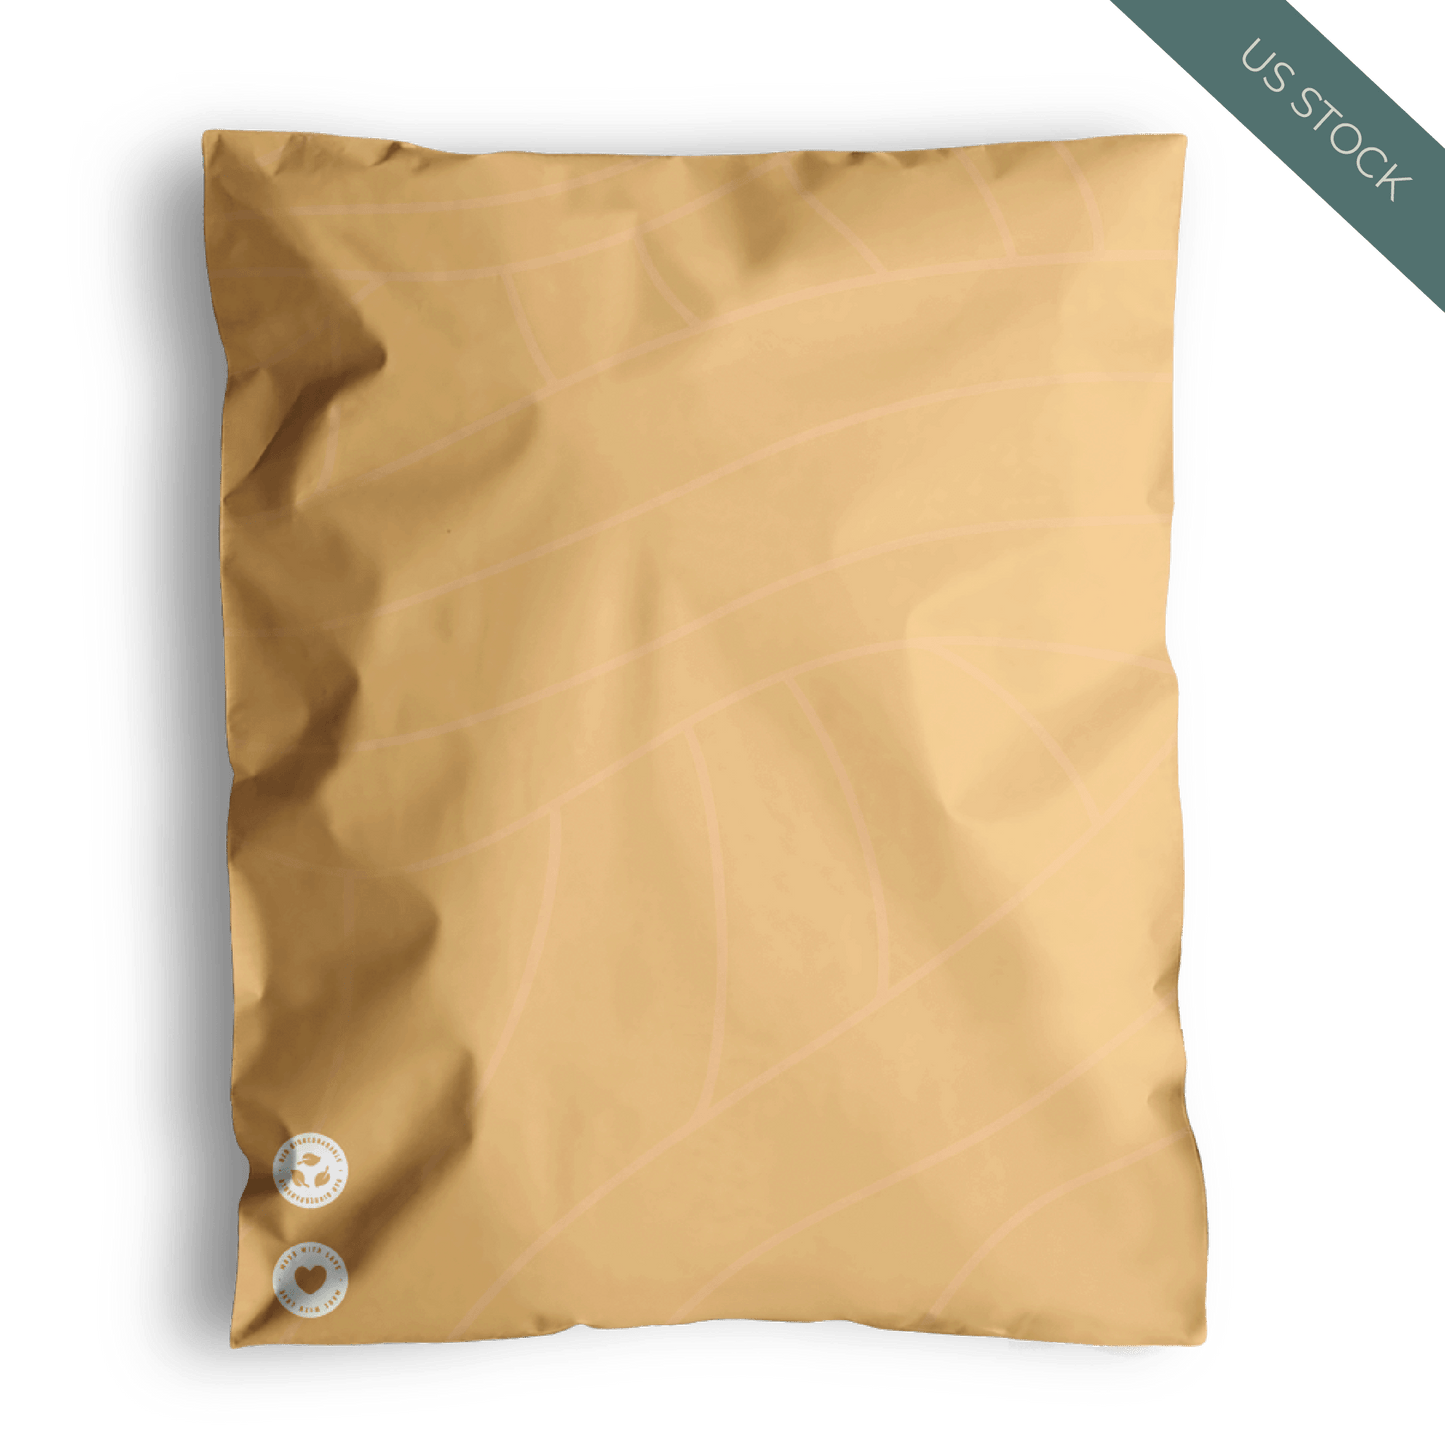 A Mustard Leaf Biodegradable Mailers 14.5" x 19" by impack.co on a white background.